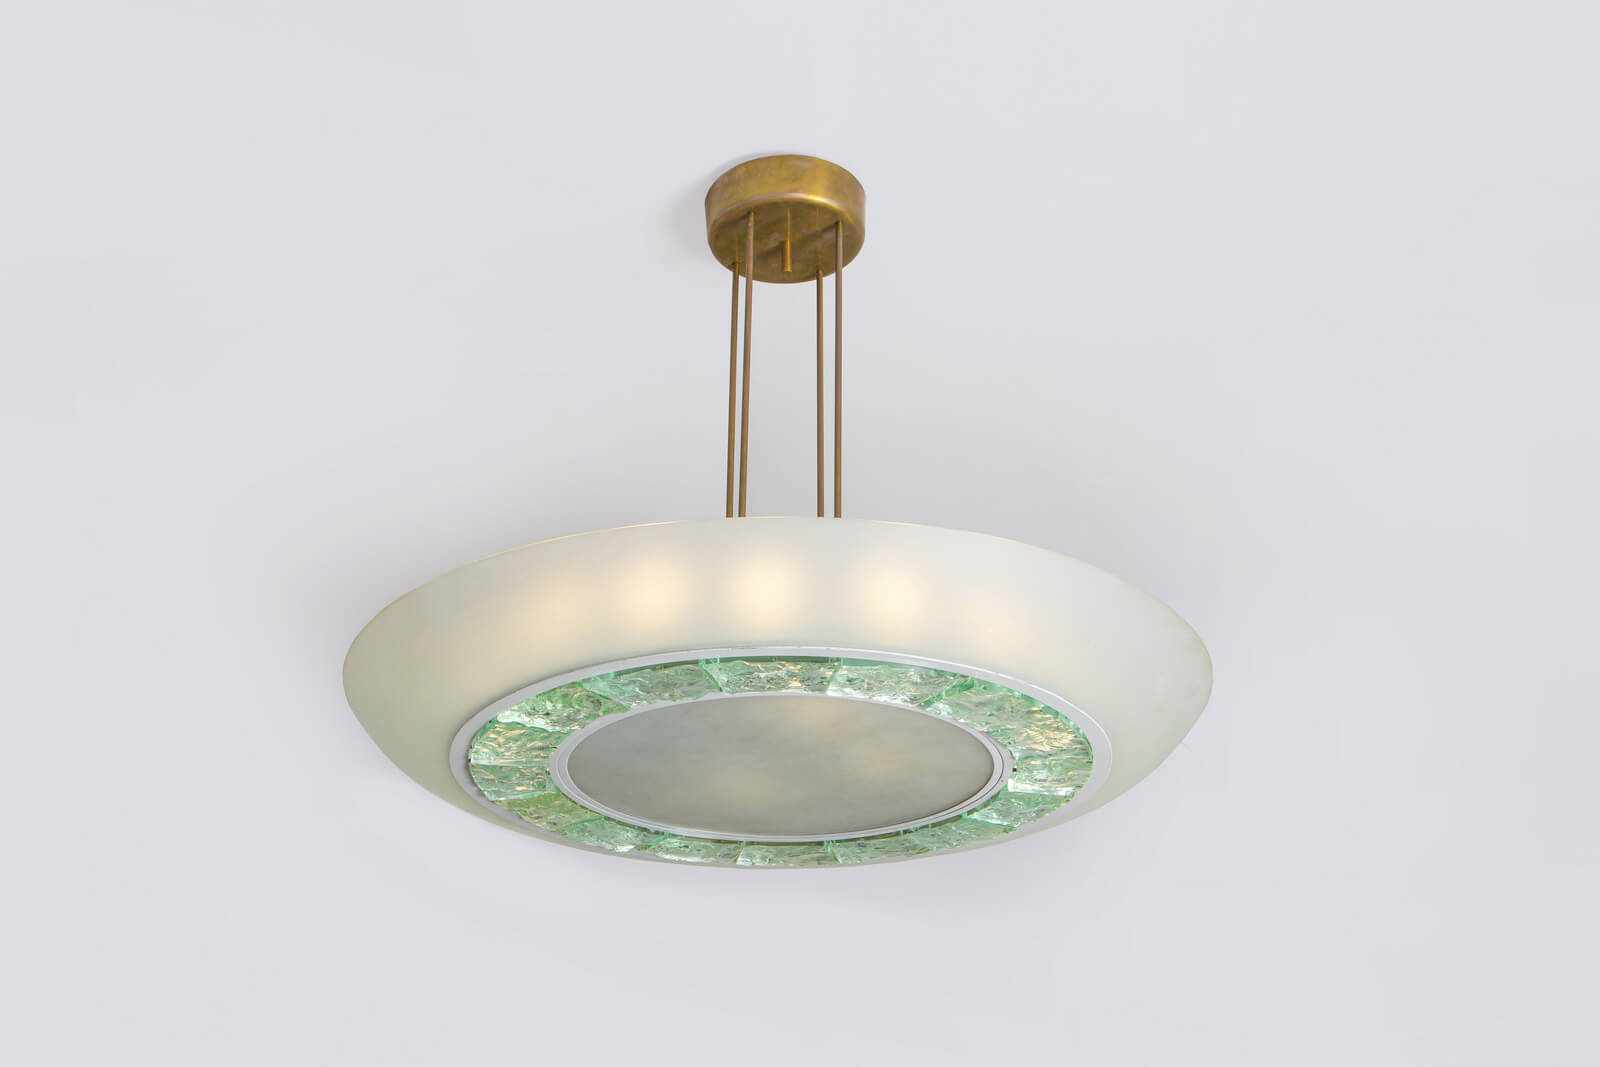 Ceiling lamp model 2459 by Max Ingrand for sale